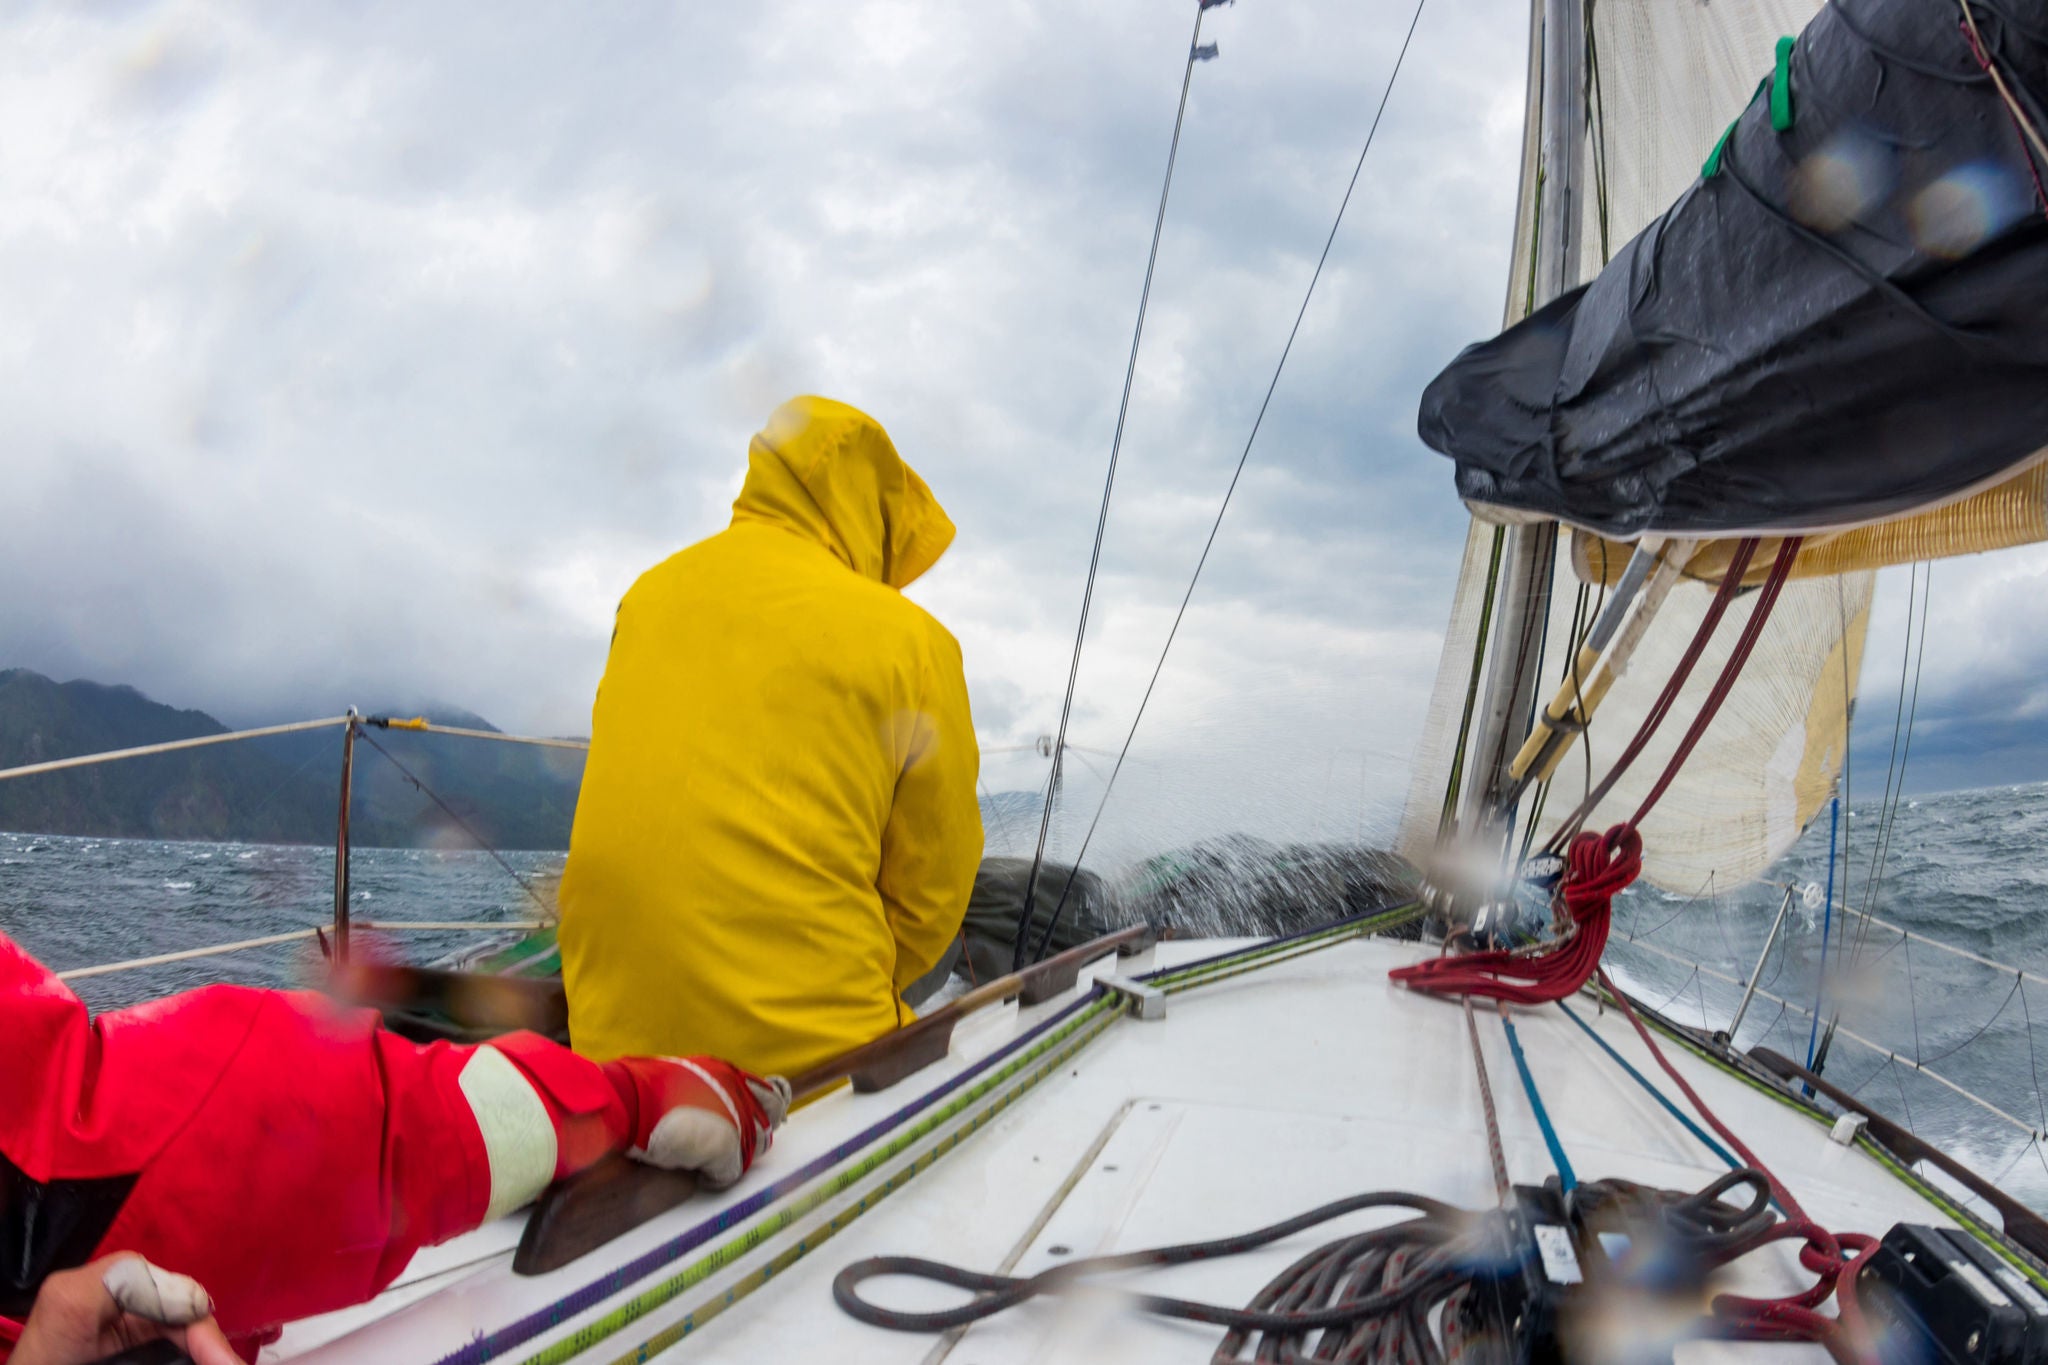 Men work with cord of sails of a yacht in the difficult storm sea